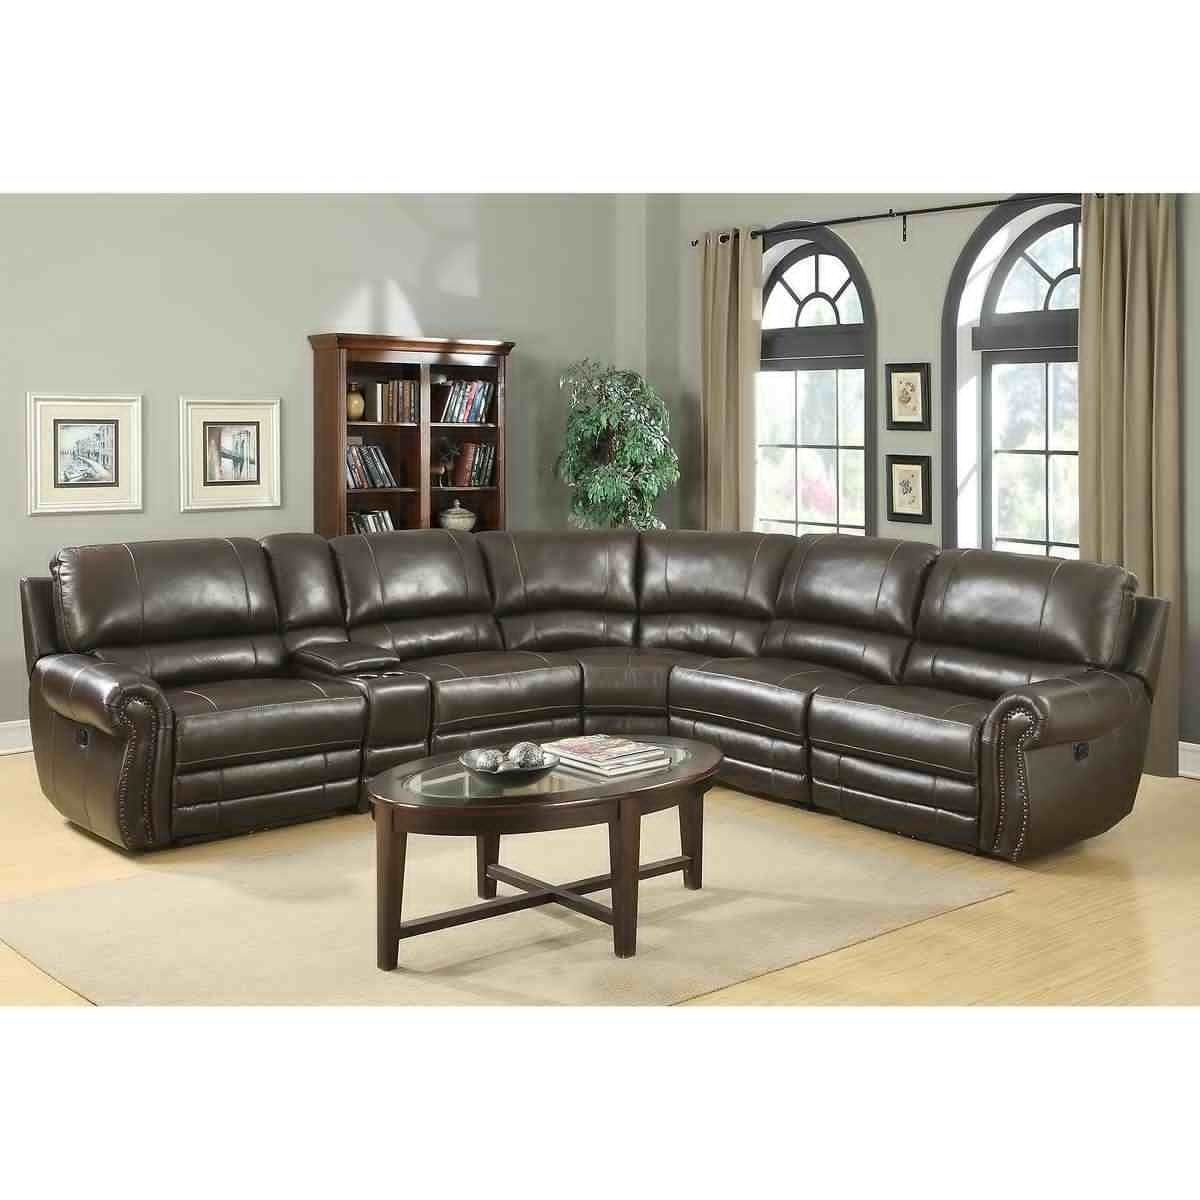 Minneapolis Sectional Sofas Intended For Latest Sectional Sofa Design: Leather Sectional Sofas Closeouts Recliners (View 9 of 20)